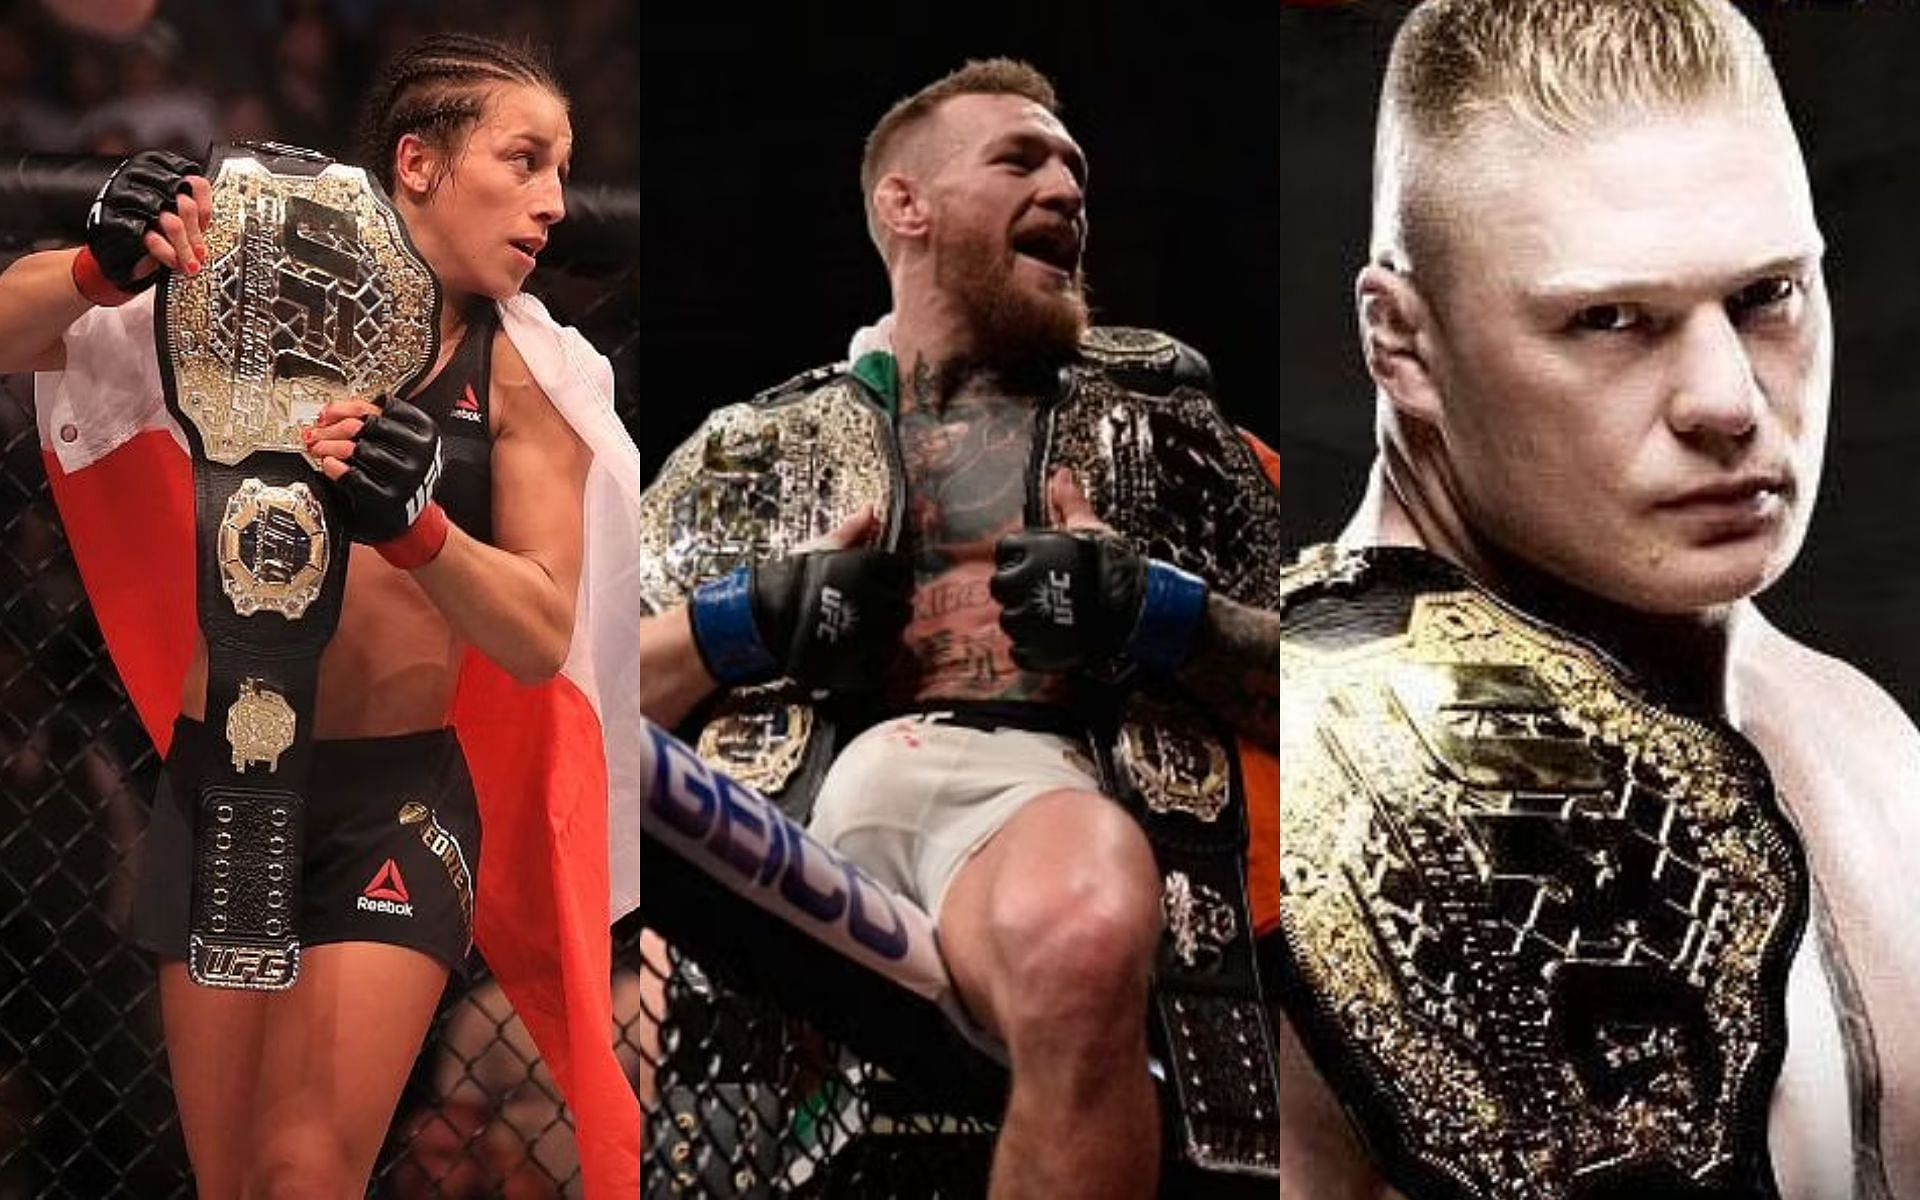 Joanna Jędrzejczyk, Conor McGregor, and Brock Lesnar (left to right)